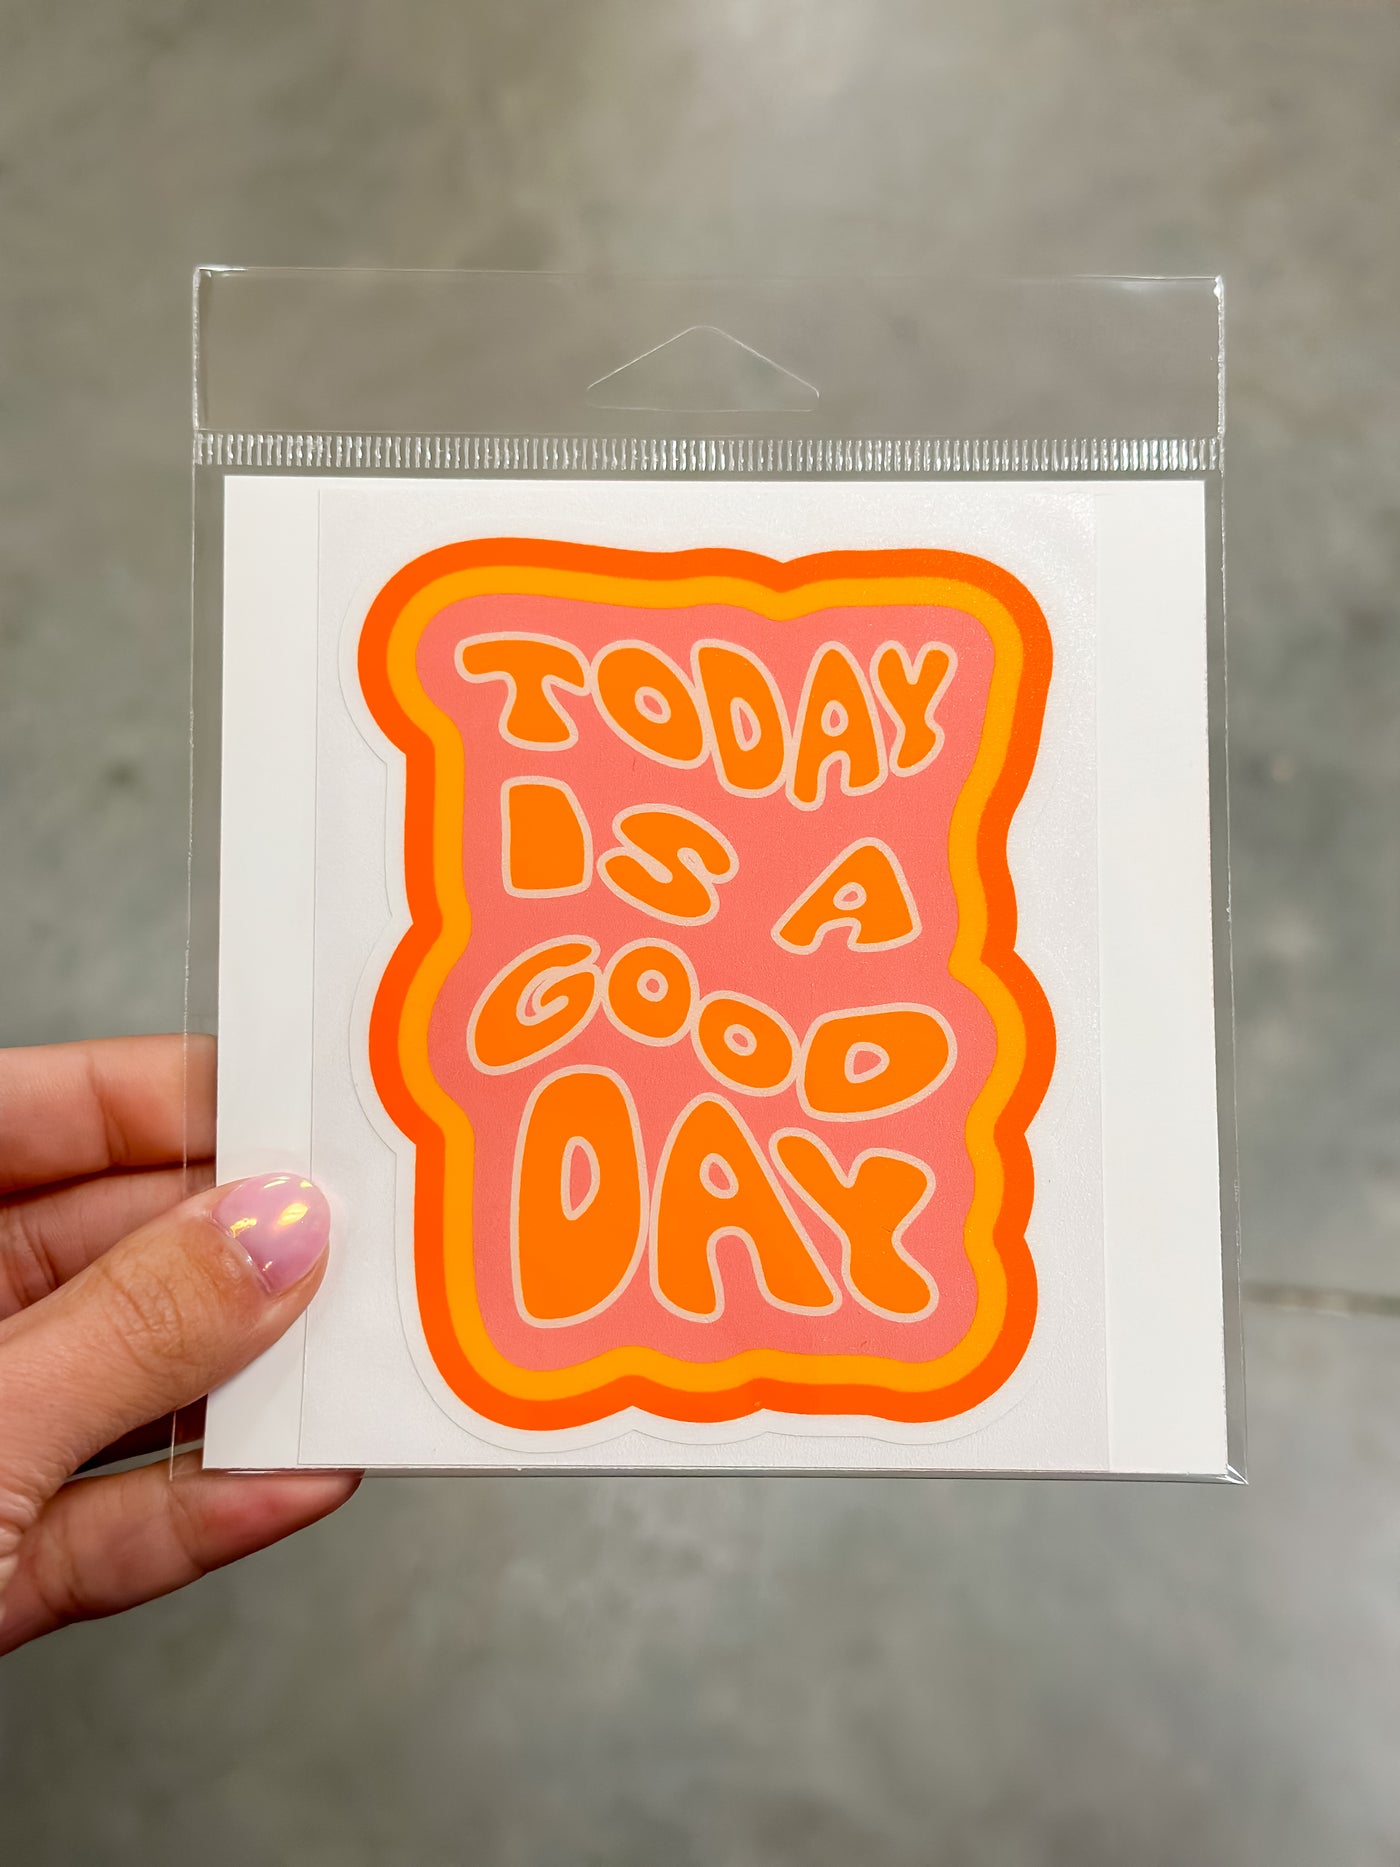 Today is a good day sticker